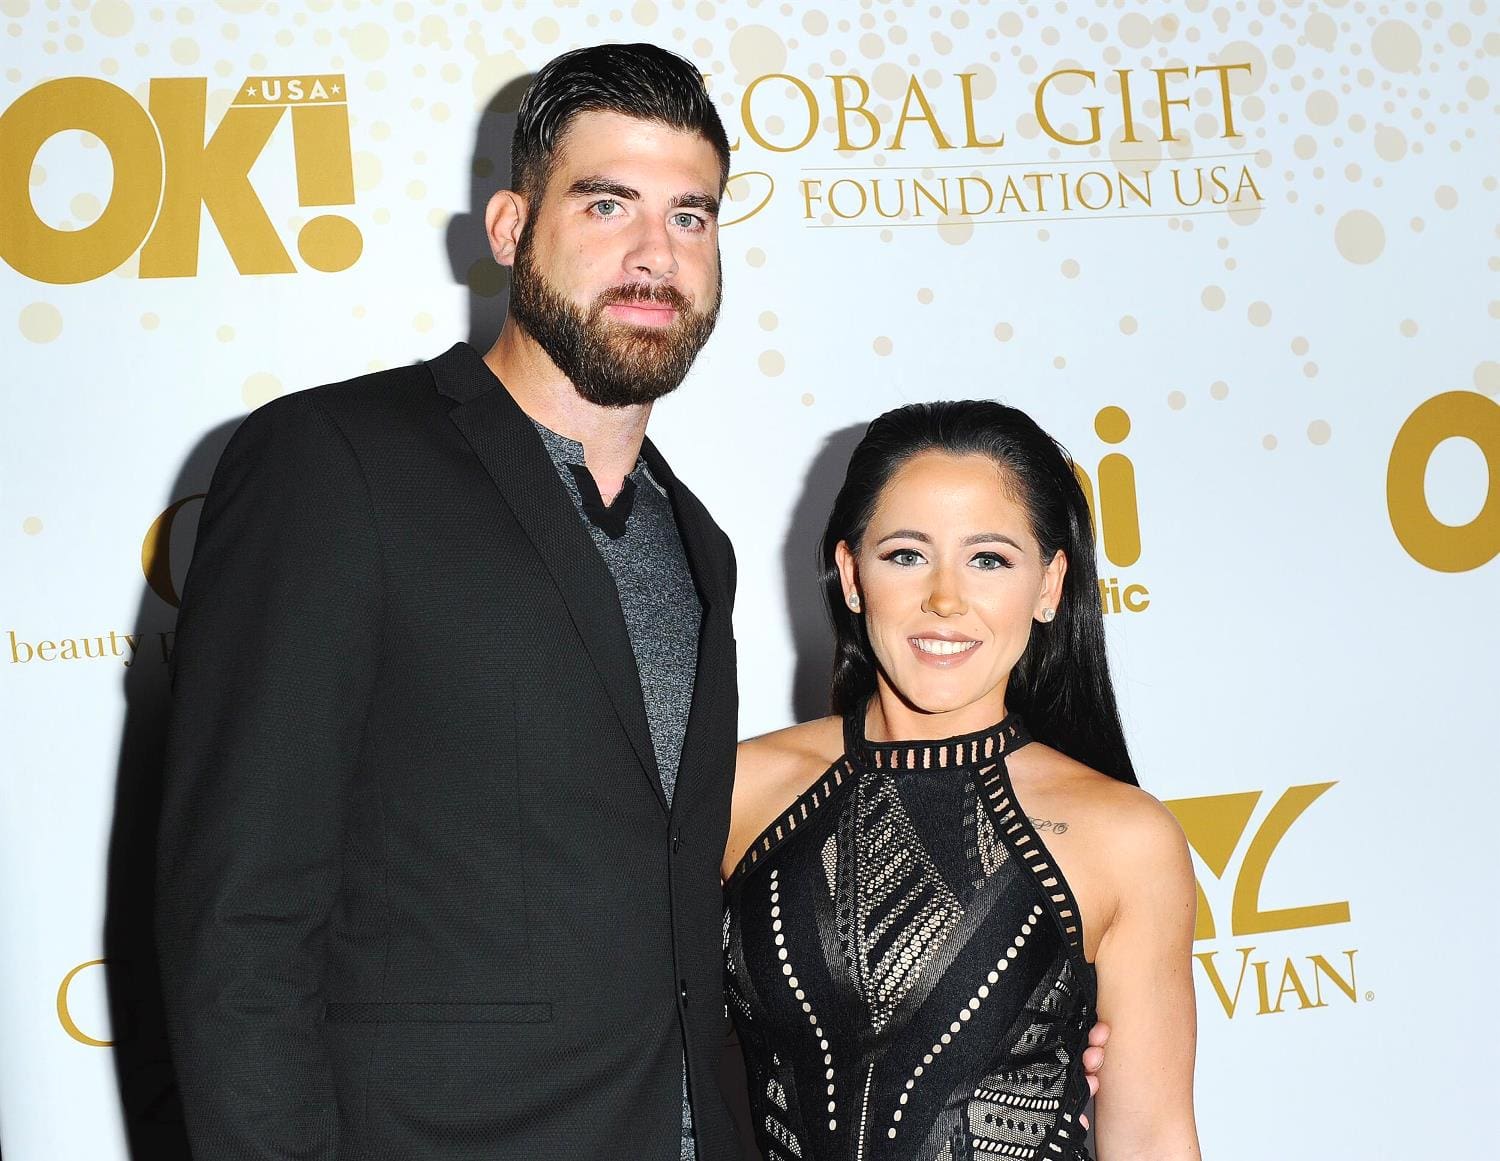 ”jenelle-evans-claims-she-husband-david-eason-and-their-young-ones-are-great-a-month-after-regaining-custody-of-the-kids”